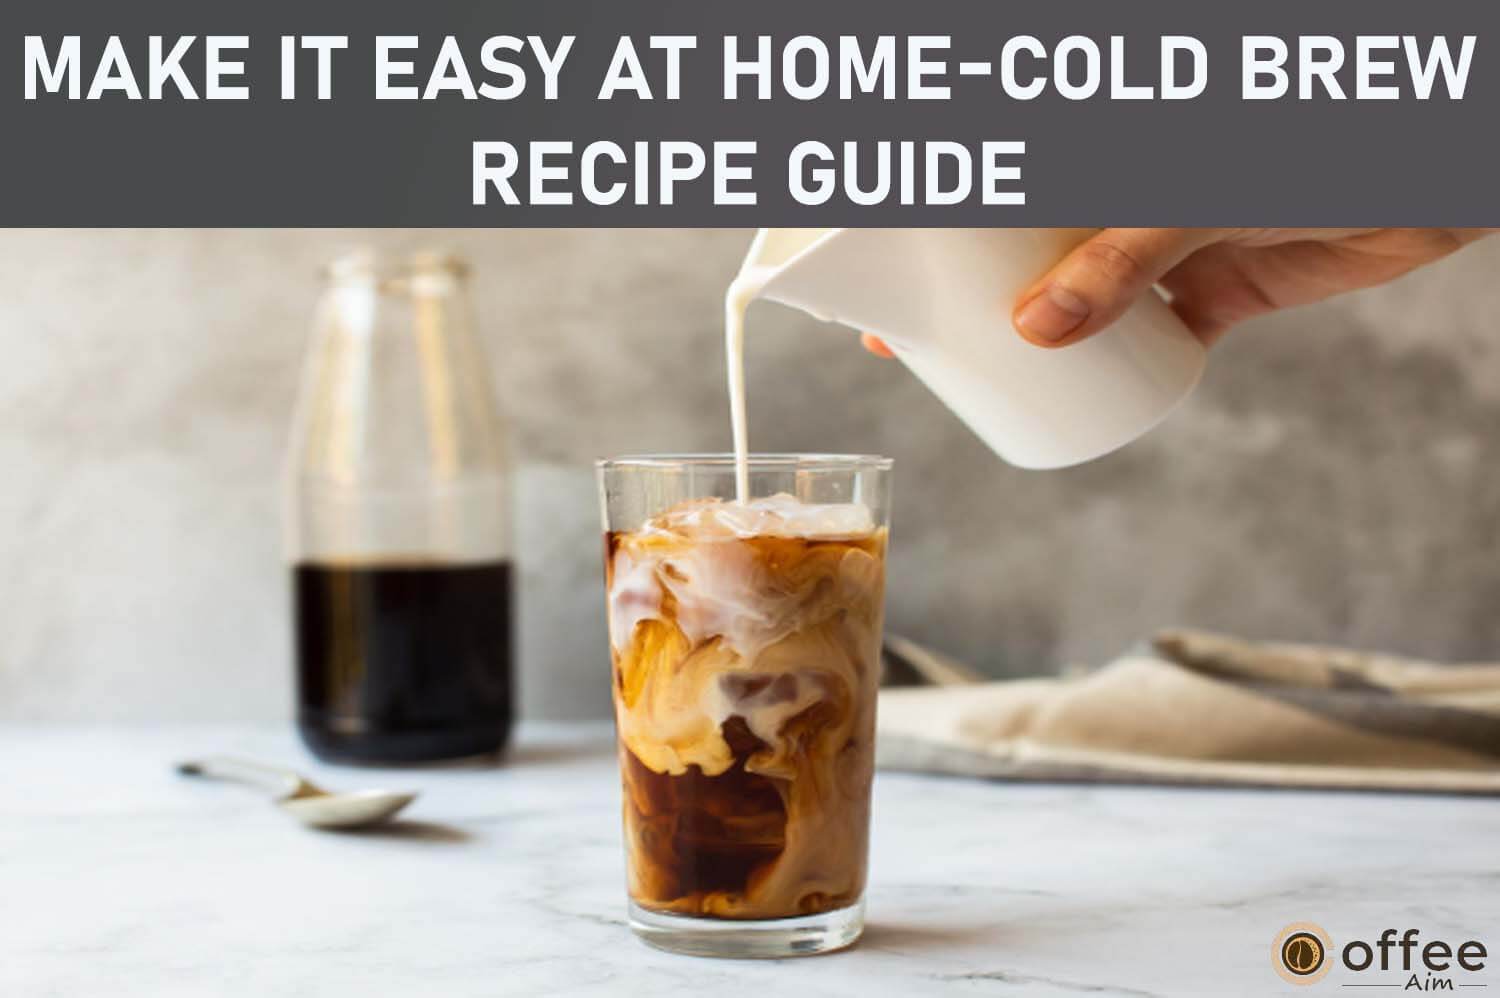 Featured image for the article "Make It Easy At Home-Cold Brew Recipe Guide"